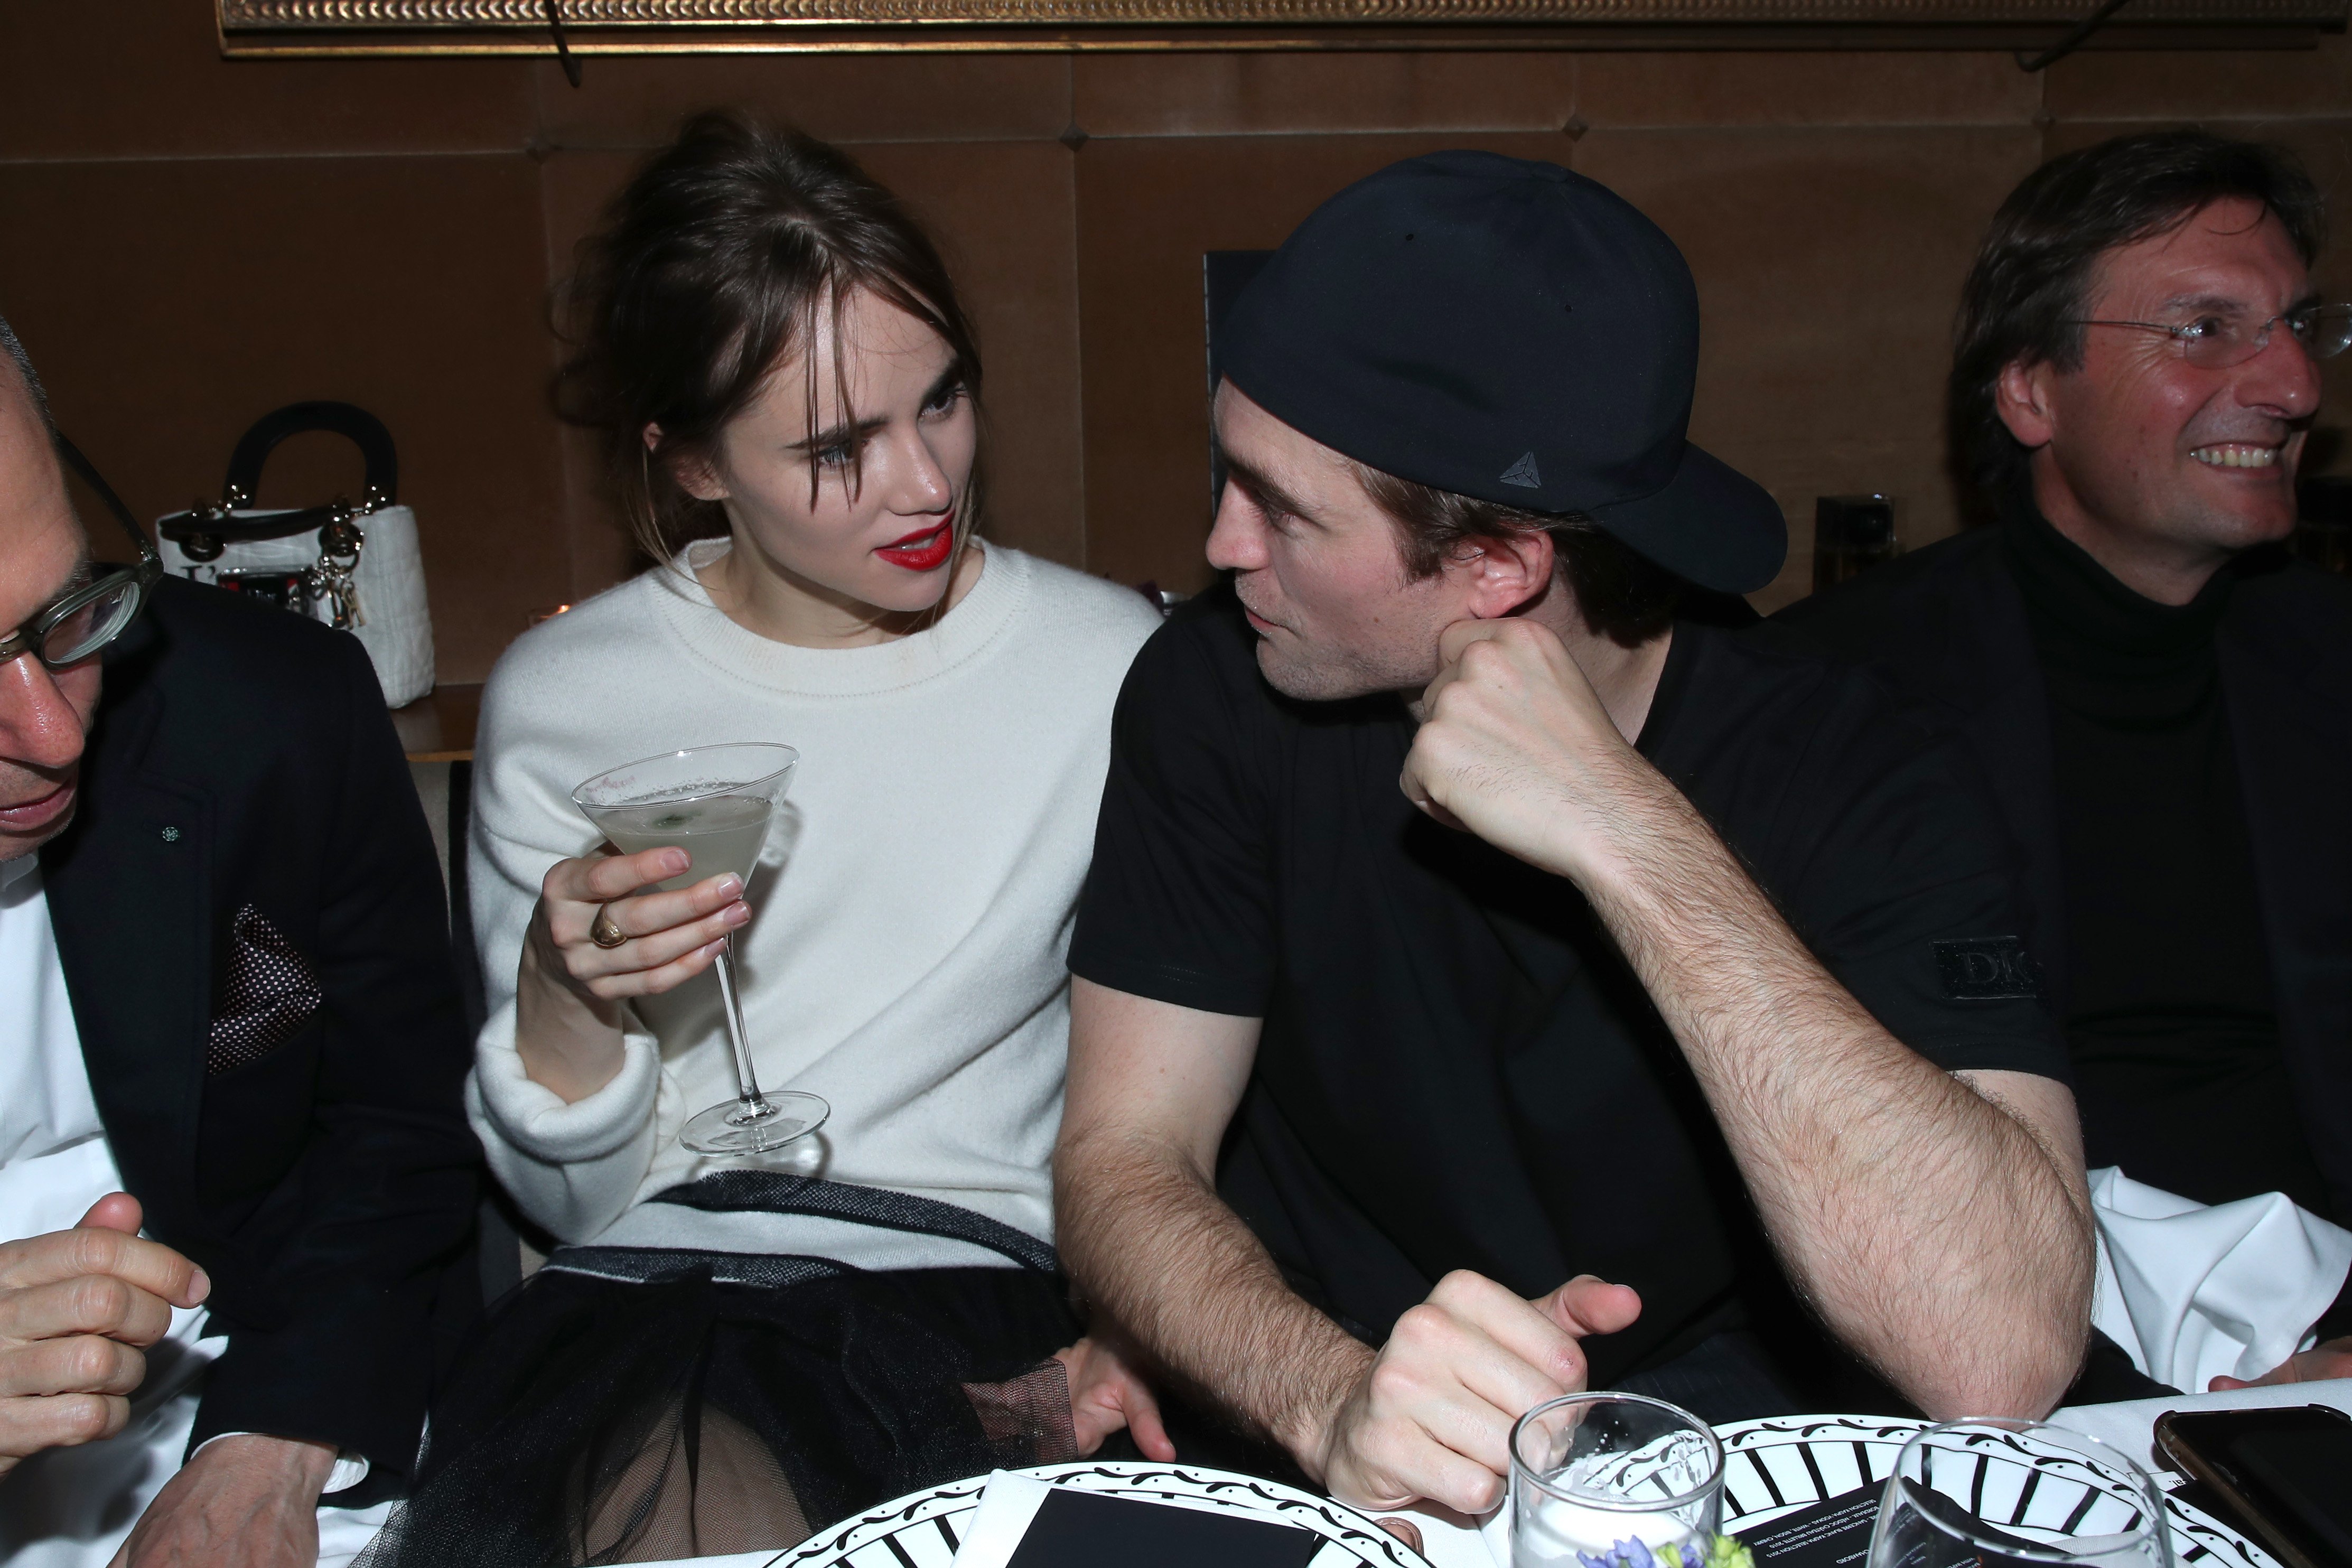 Suki Waterhouse and Robert Pattinson attend the Dior Perfume Dinner, as part of Paris Fashion Week, at Caviar Kaspia on January 17, 2020 in Paris, France. | Source: Getty Images